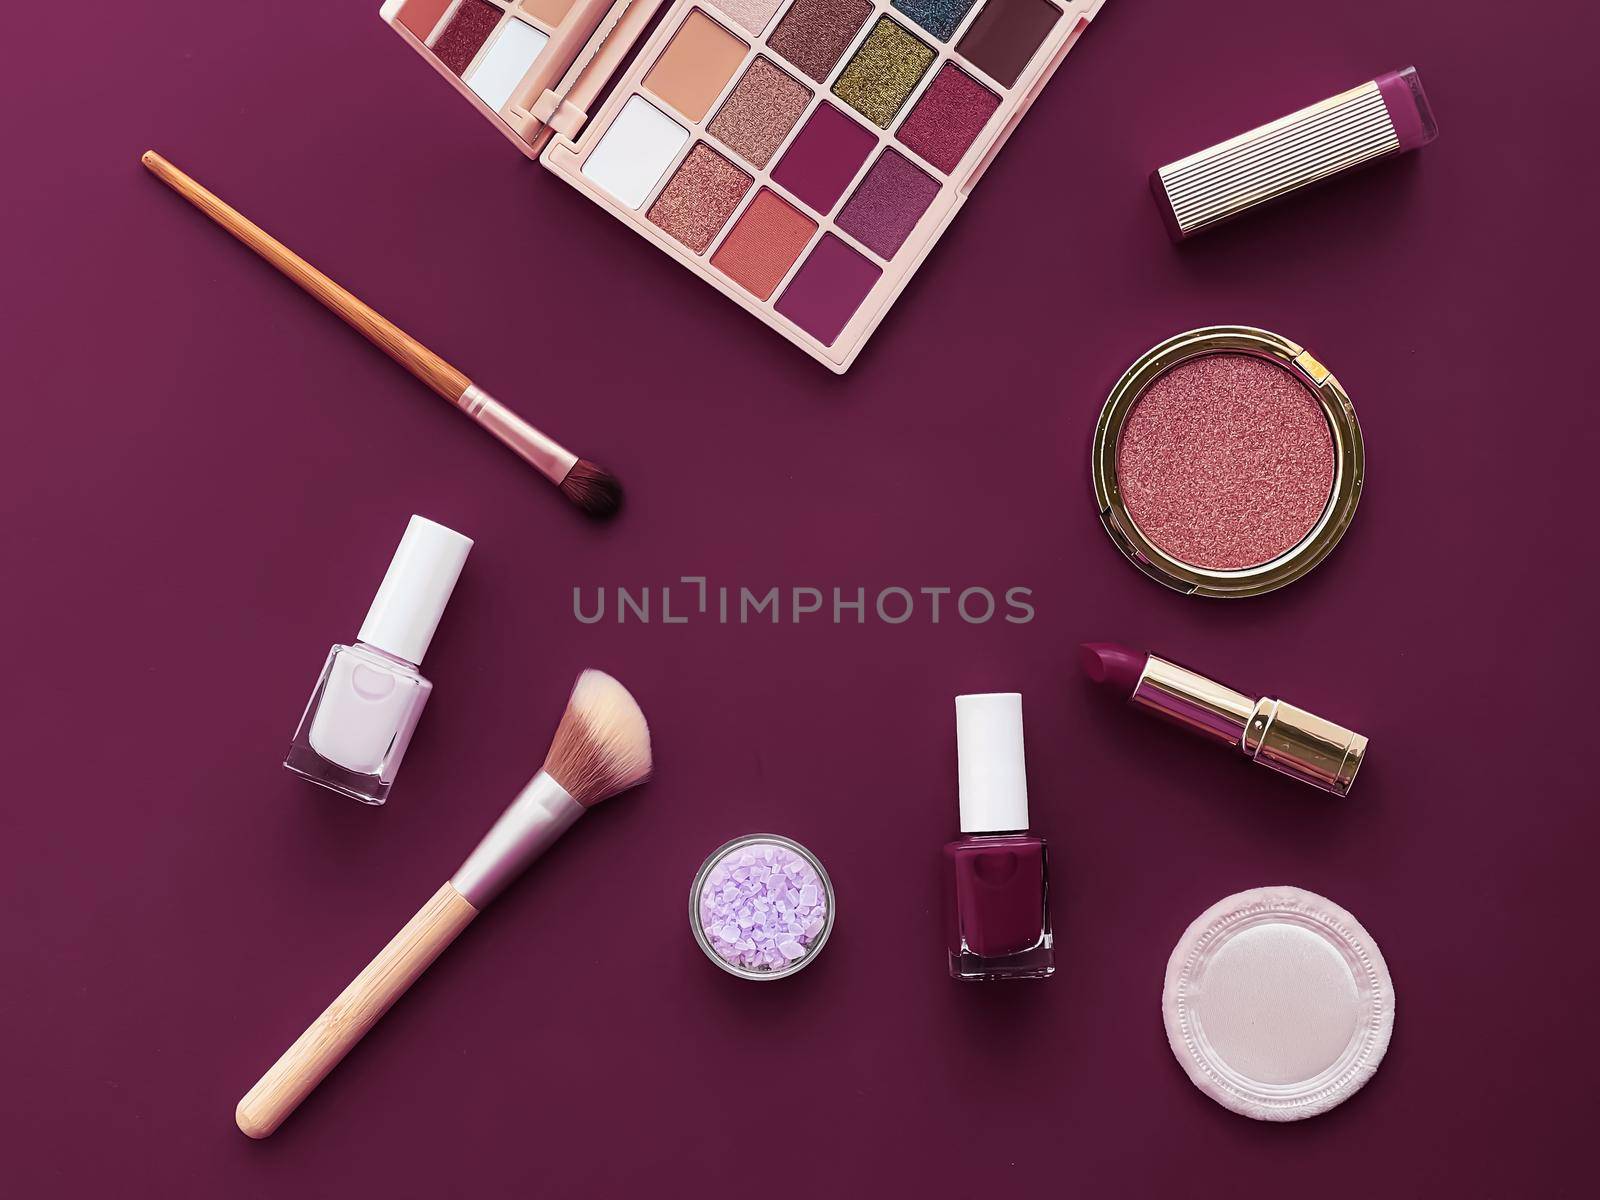 Beauty, make-up and cosmetics flatlay design with copyspace, cosmetic products and makeup tools on purple background, girly and feminine style by Anneleven